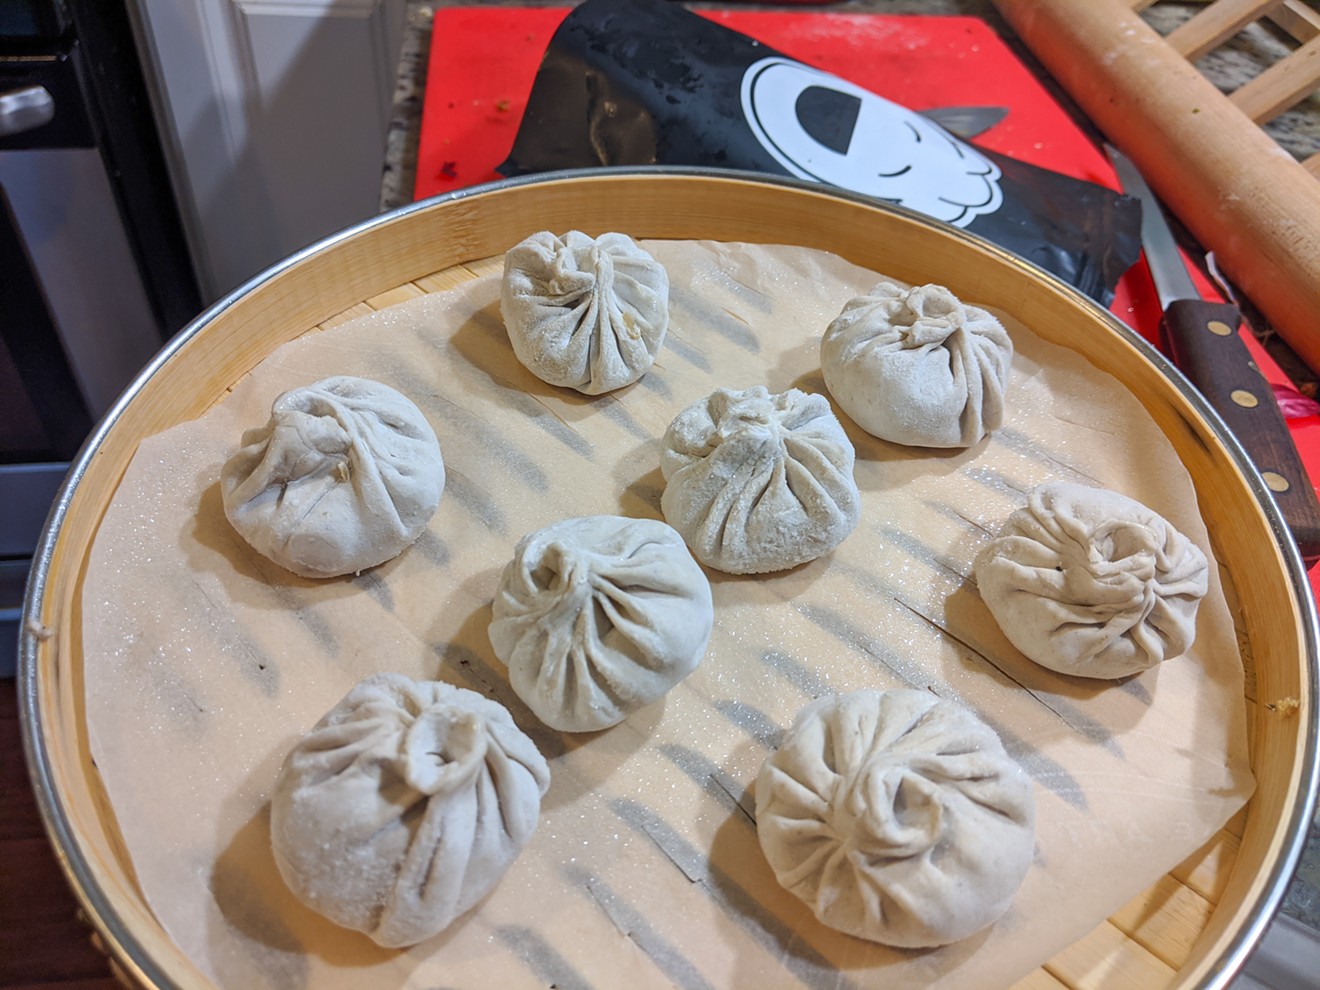 It turns out, frozen momos may be the perfect next step for our beloved Nepali dumpling pop-up business.